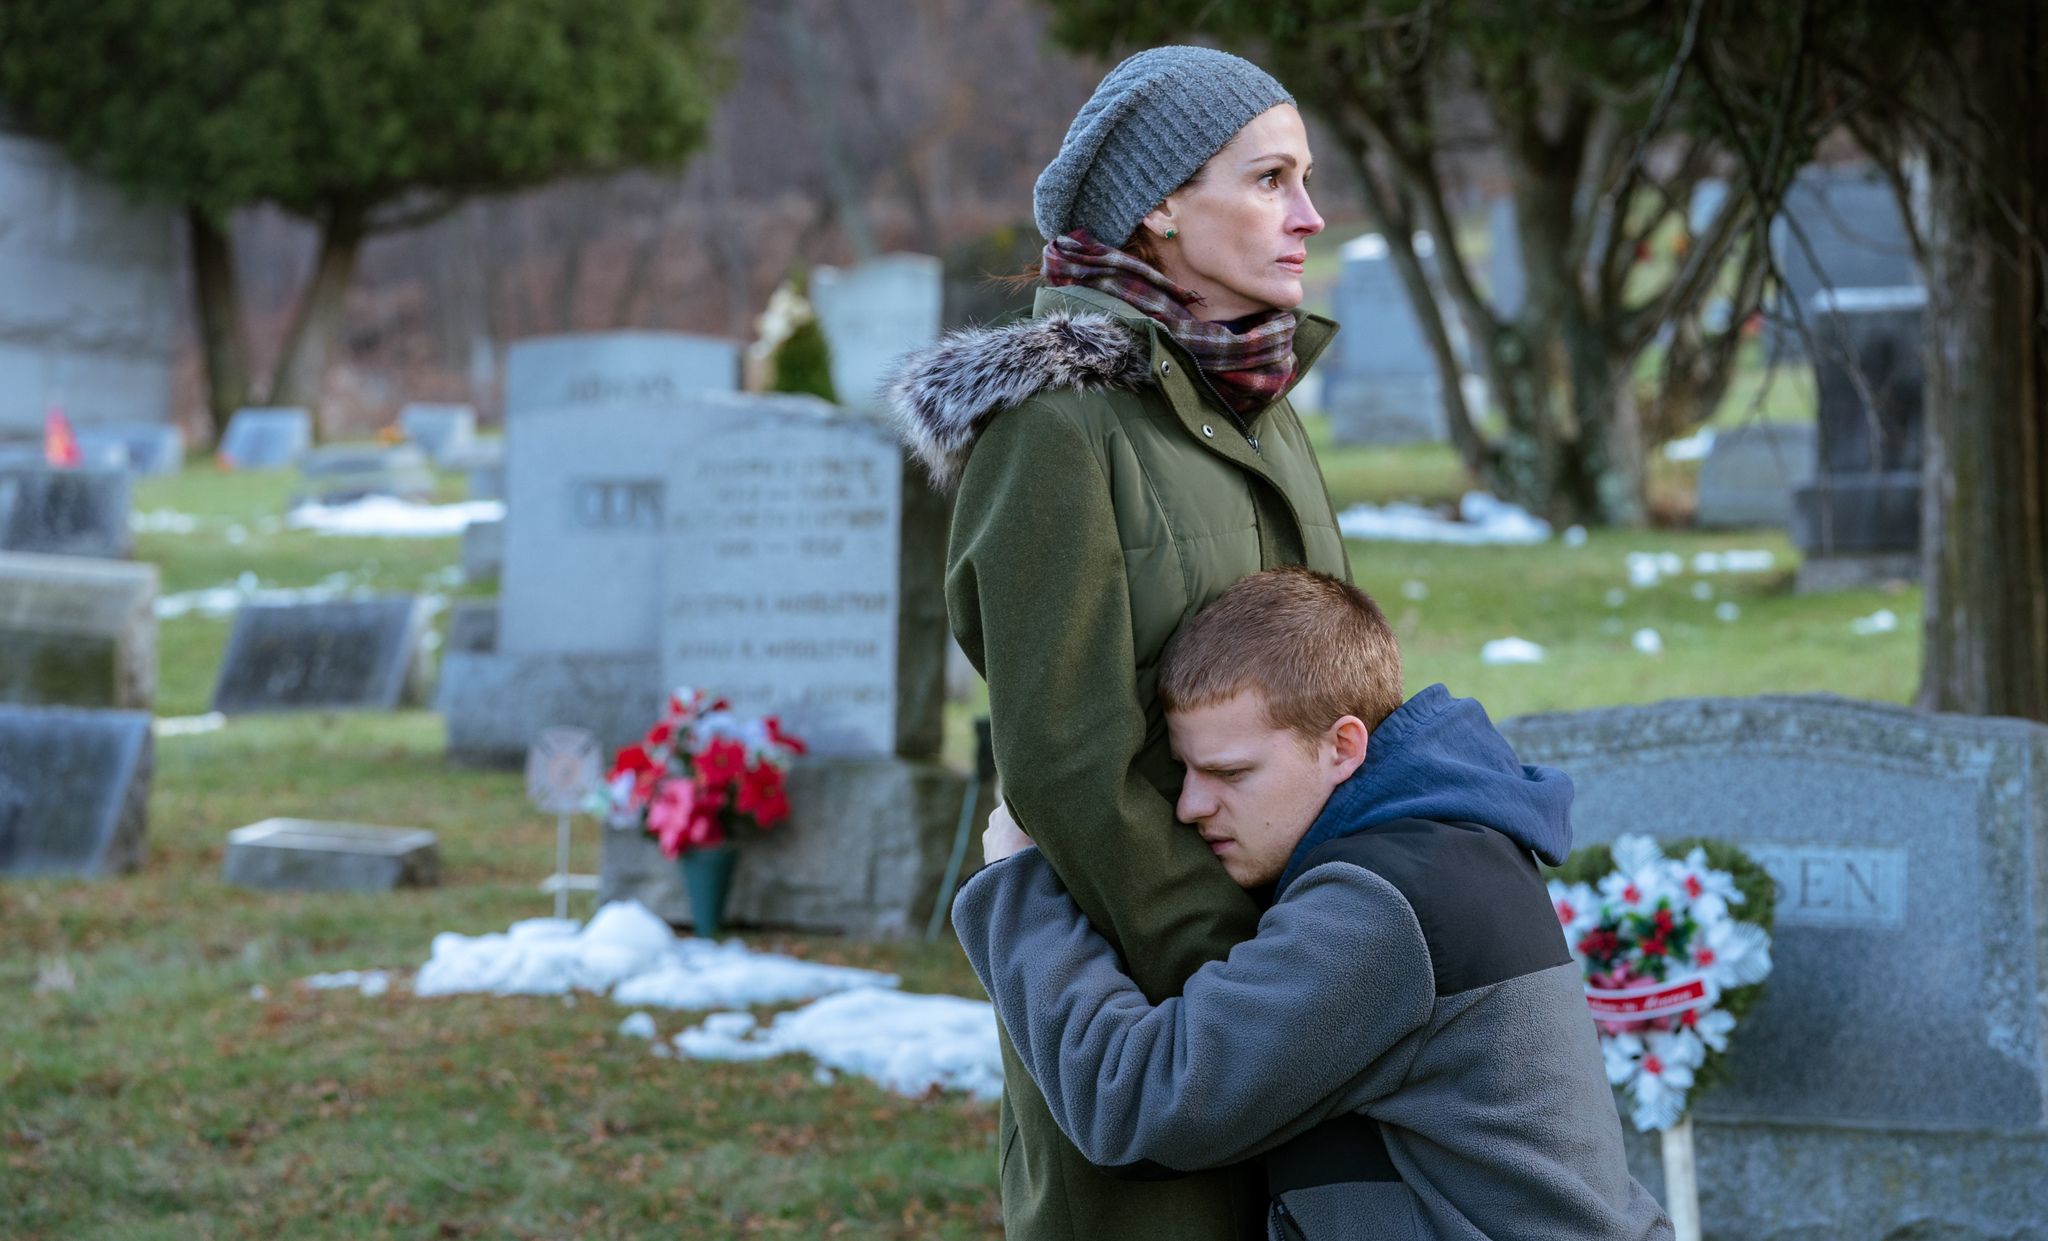 Julia Roberts and Lucas Hedges in &#039;Ben is Back&#039;